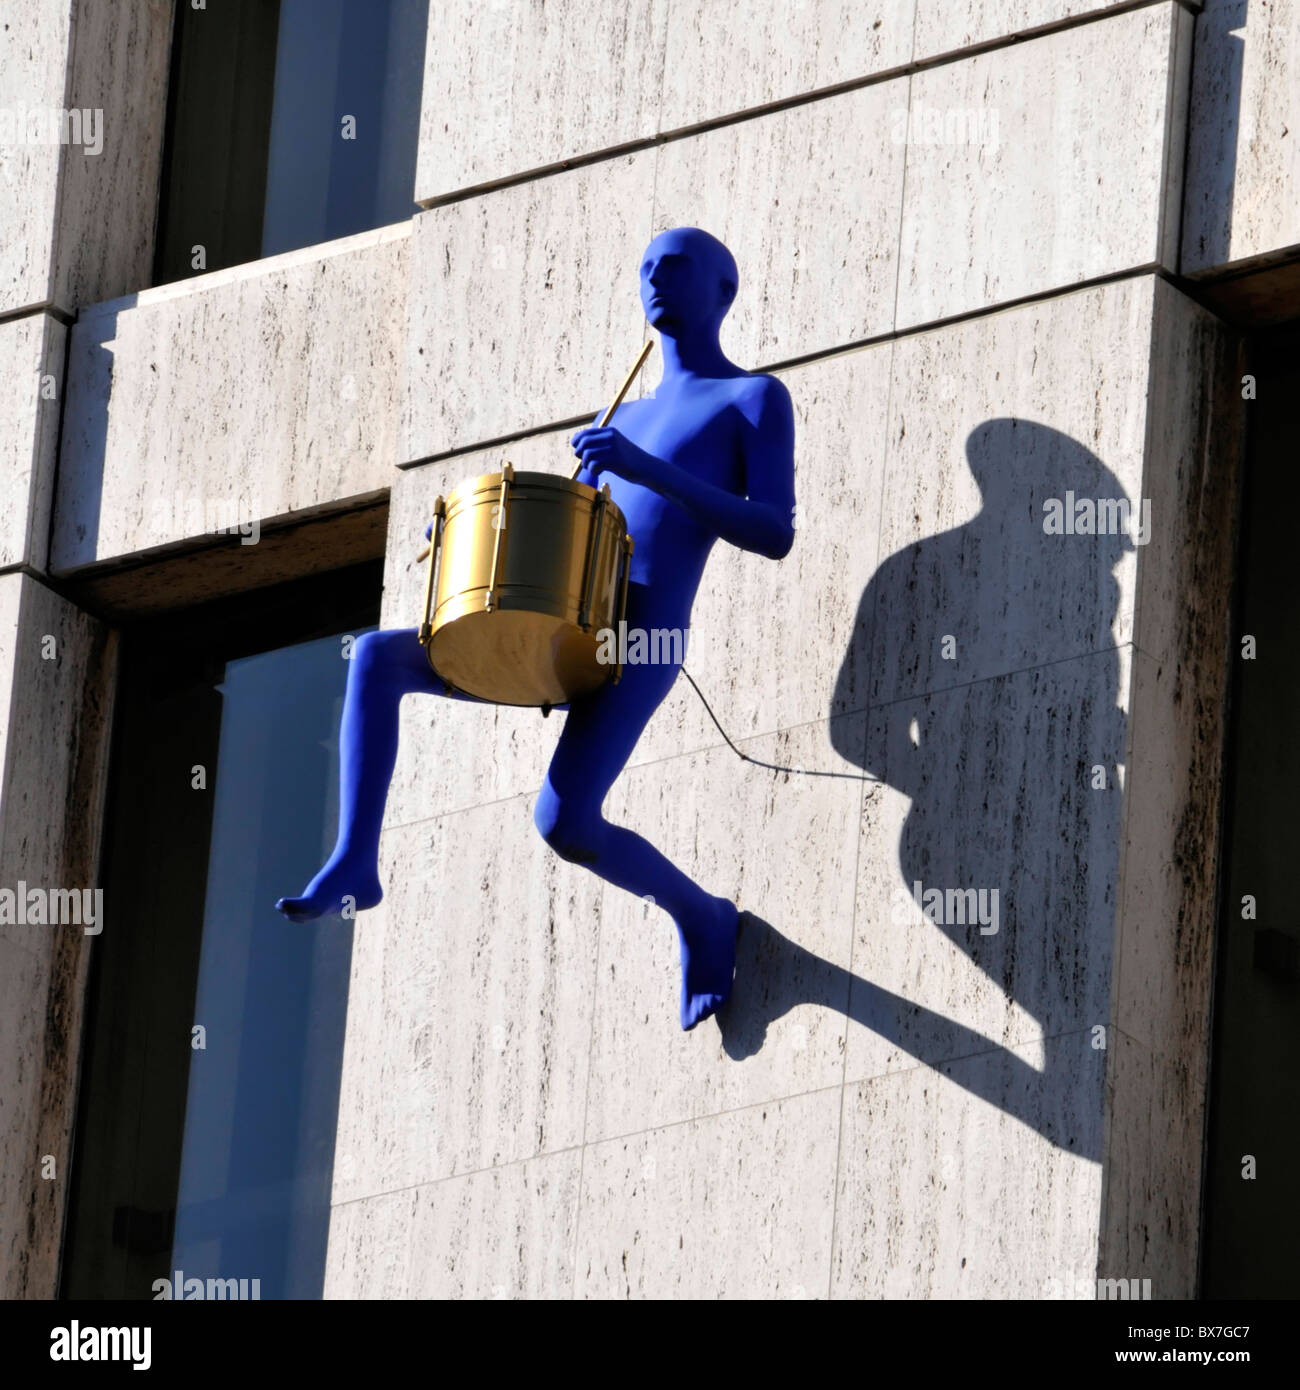 Part of the 'Blue Men' art installation by Ofra Zimbalista on an office building wall Stock Photo